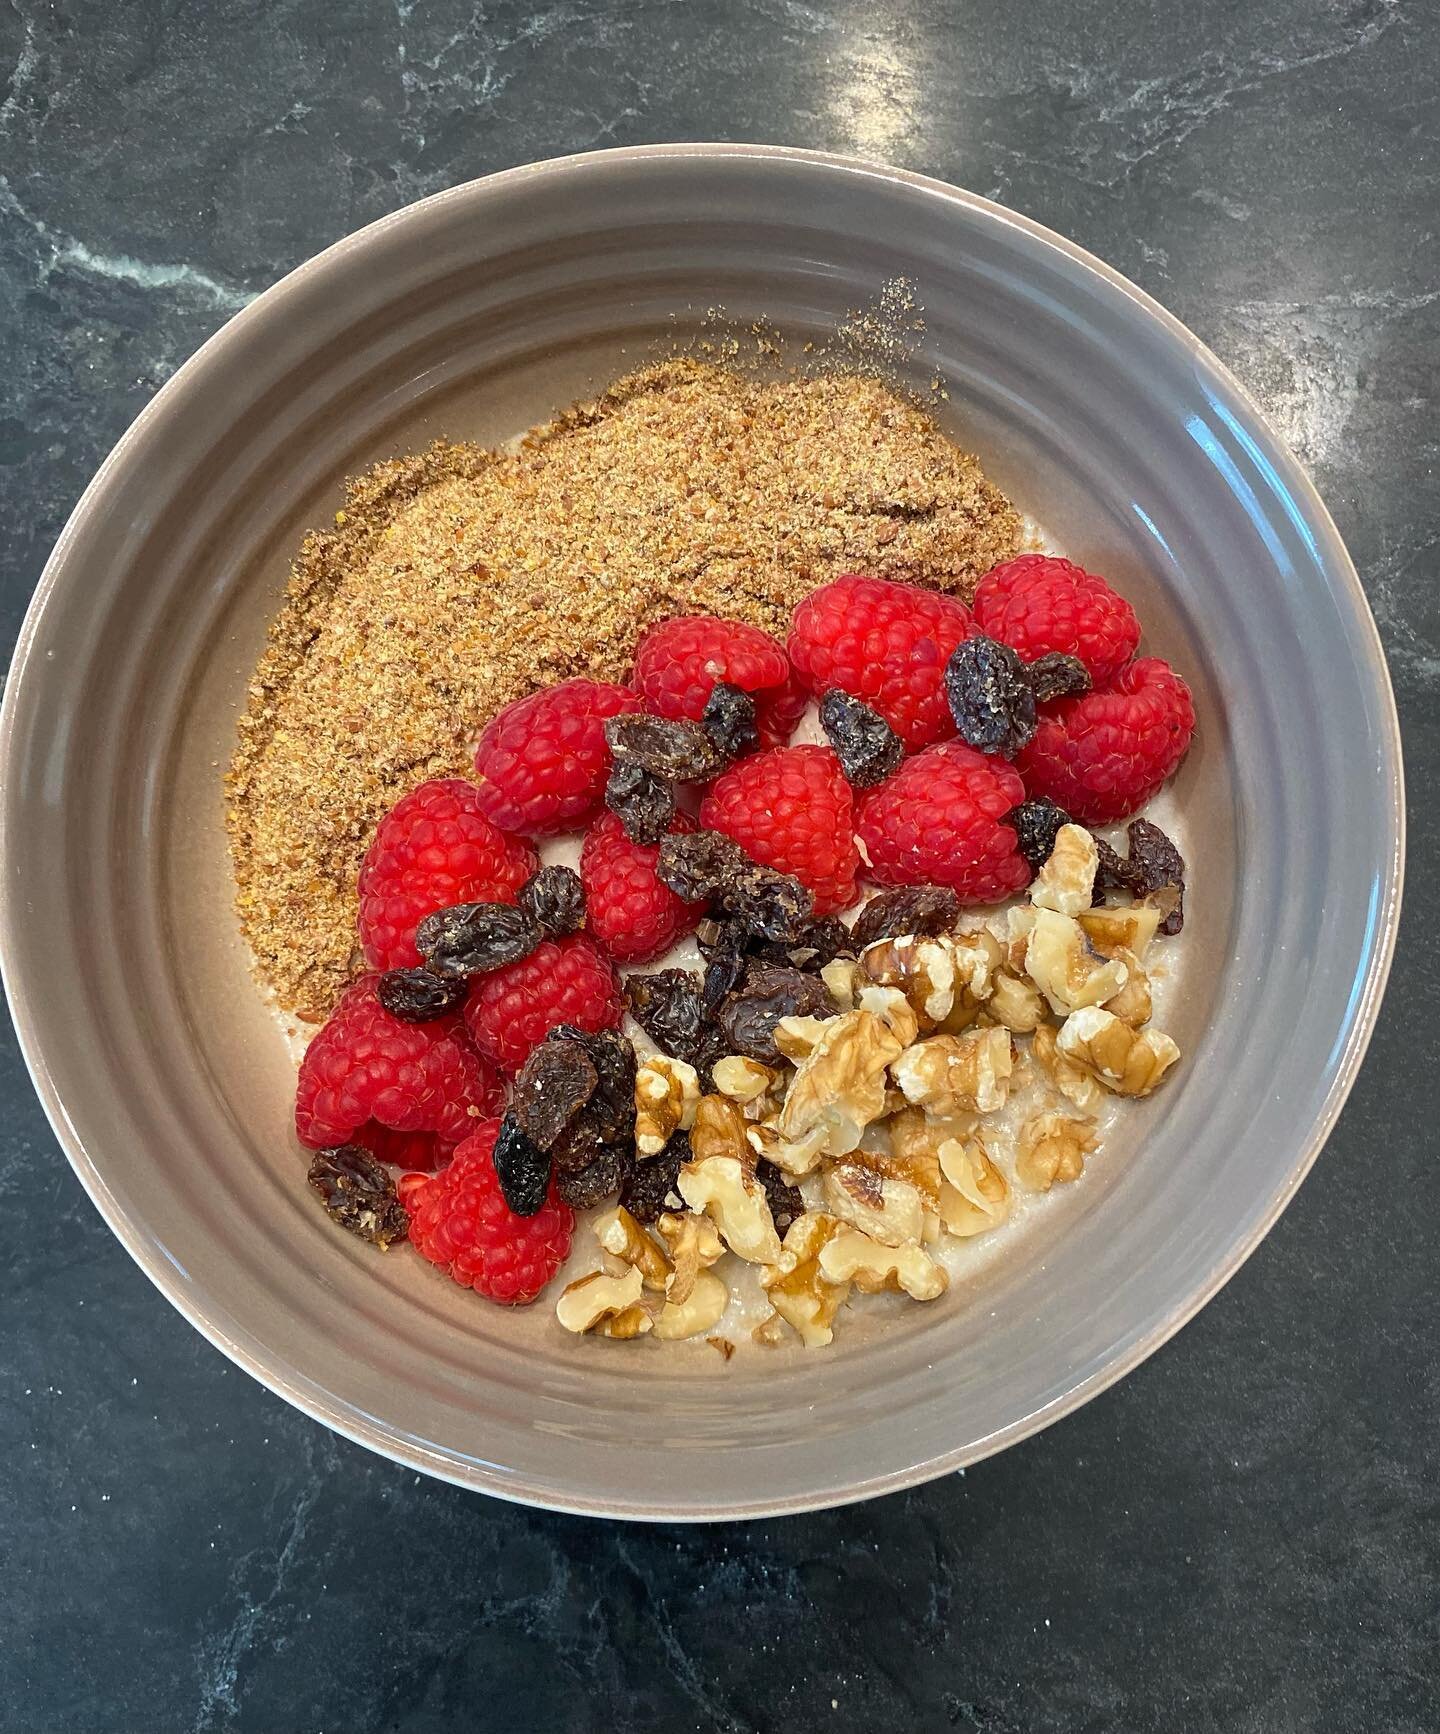 It&rsquo;s an oatmeal bowl today.  I cook mine with some kind of milk for creamy oats. Top with lots of fruit, nuts and ground flax.  How do you too your oatmeal?
#breakfast #oatmeal #highfiber #deliciousness #plantbased #hearthealthy #lowfodmap #glu